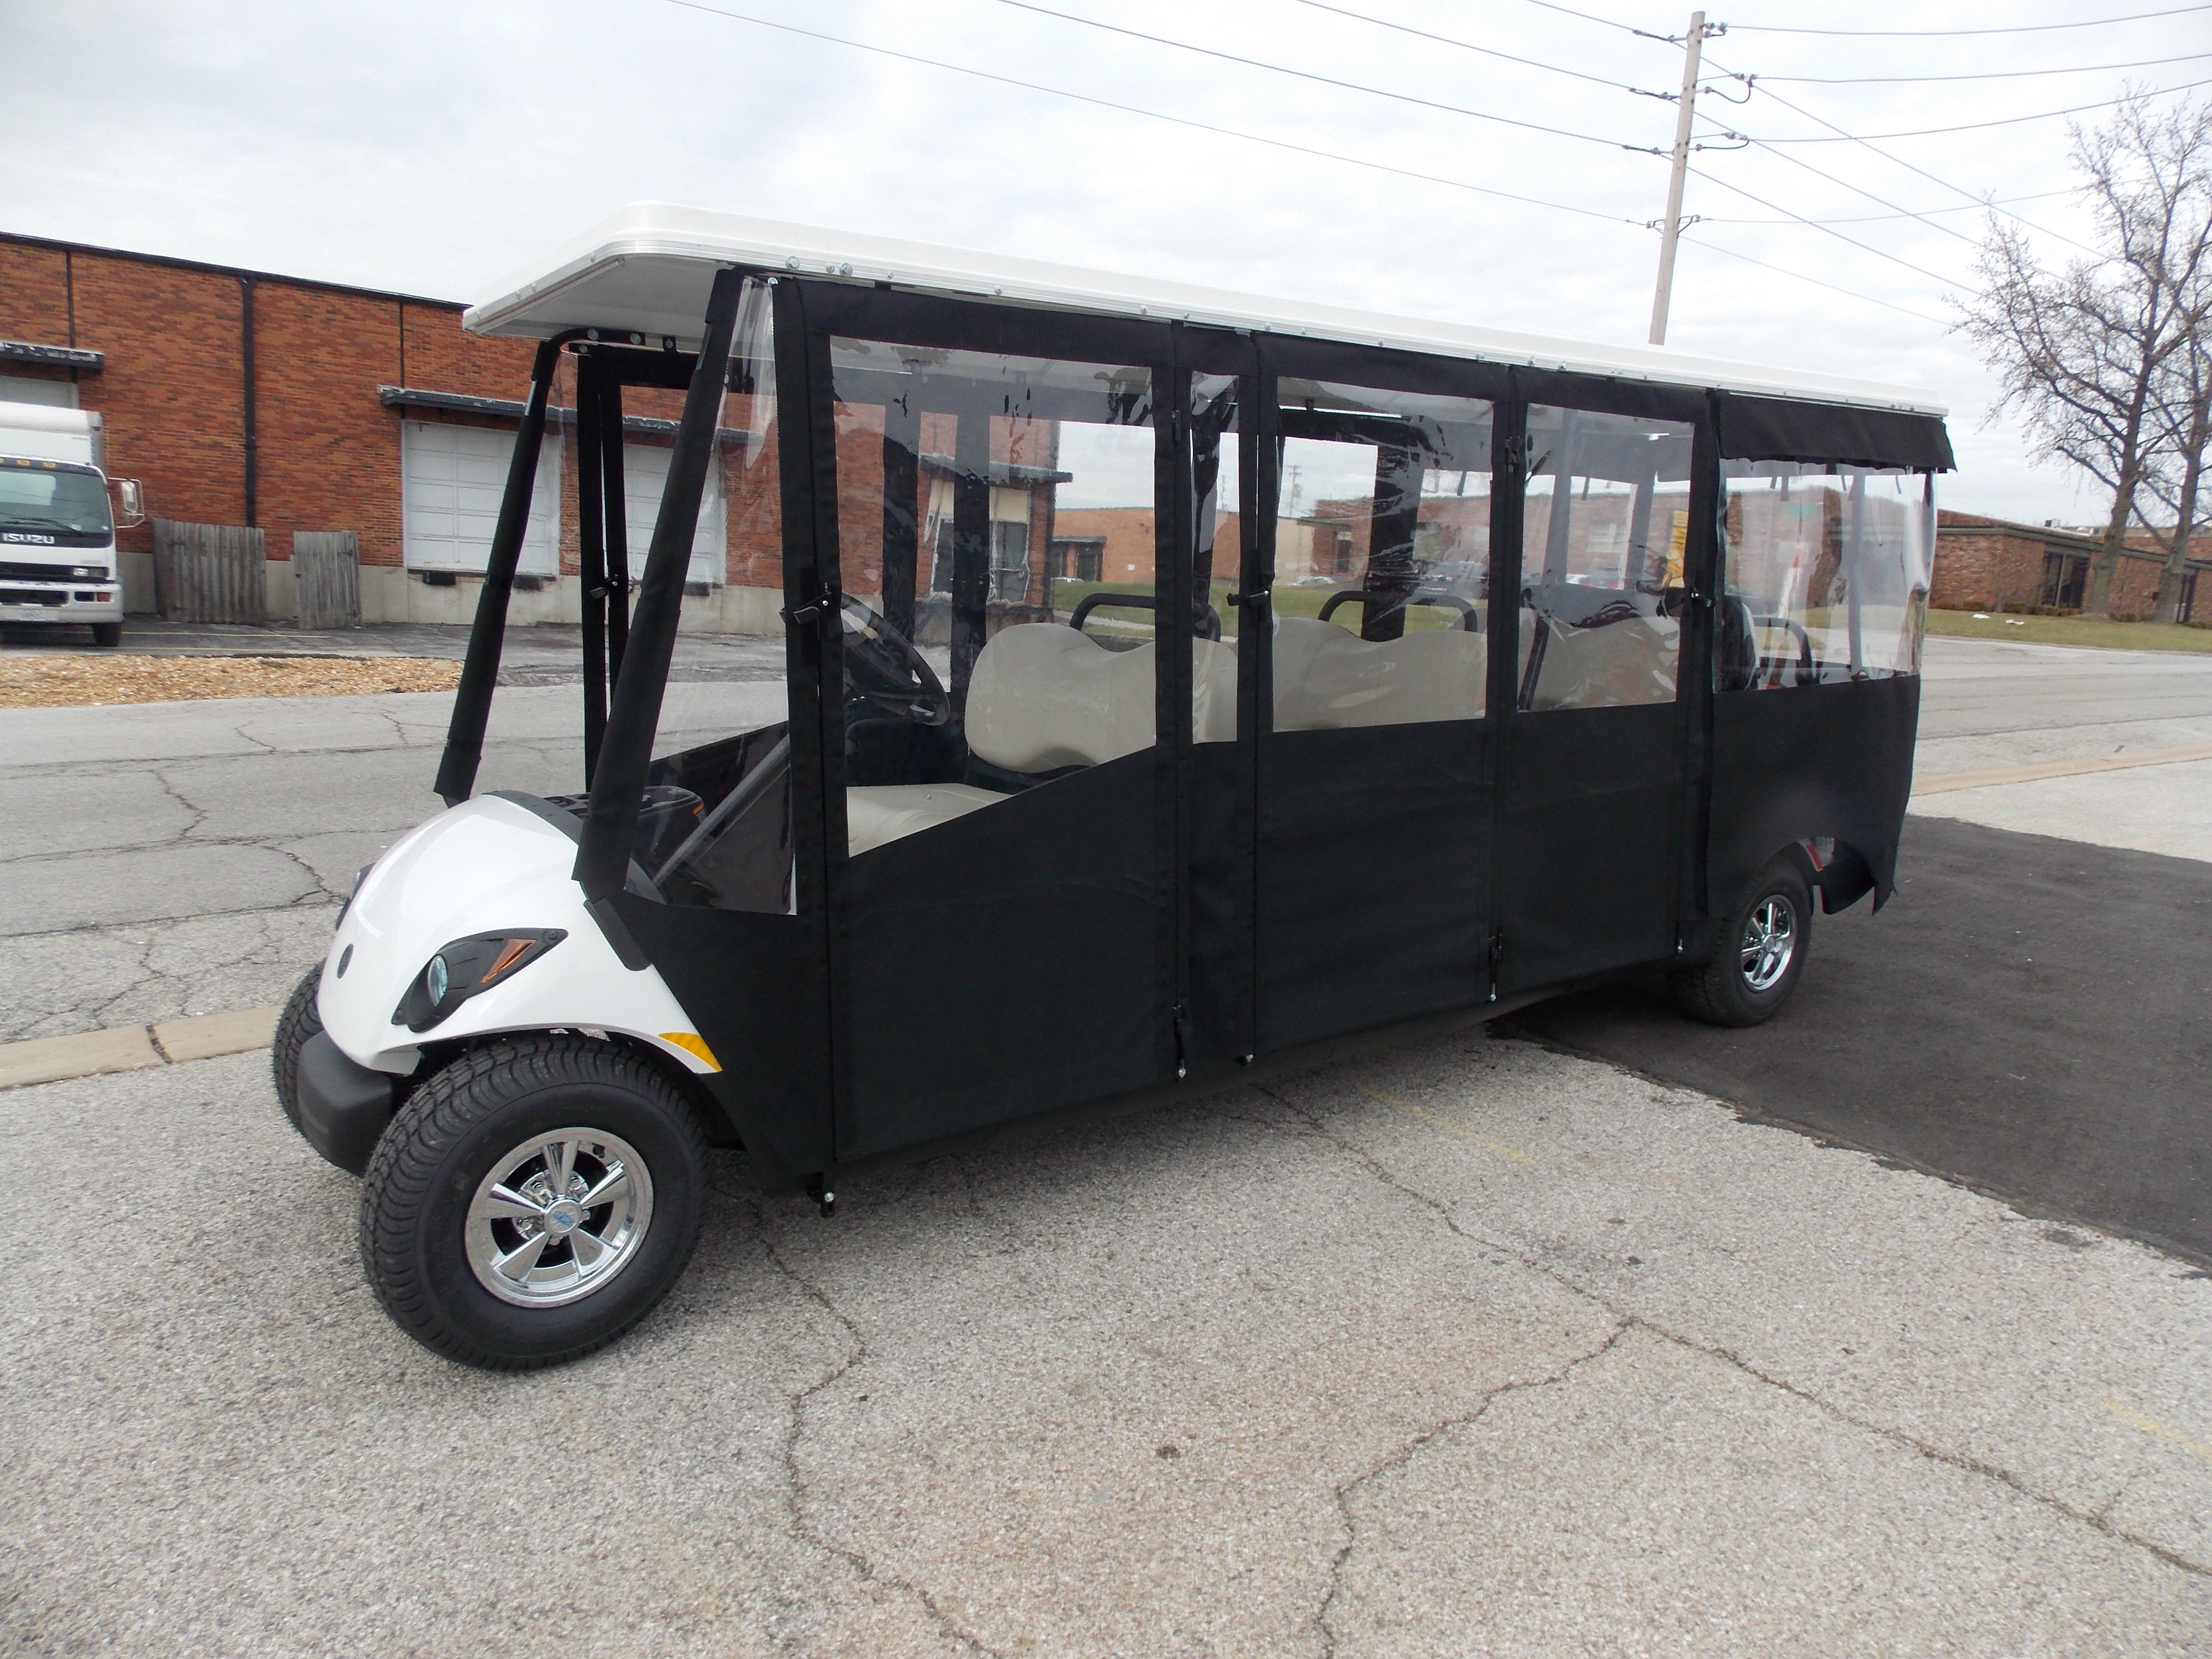 Rubber Weather Stripping. Seal the Doors. – Ace Golf Cart: Best